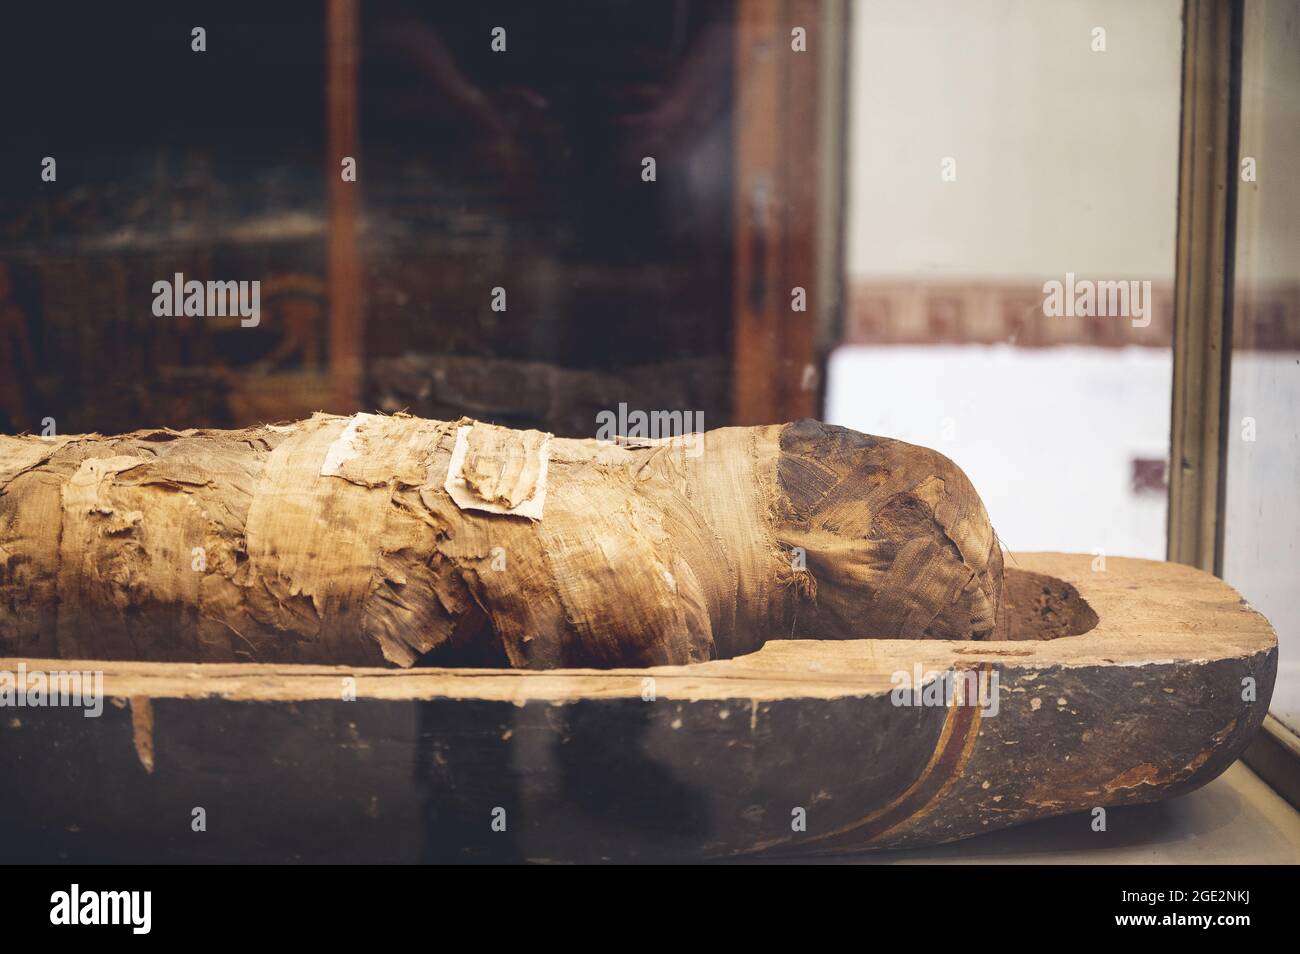 CAIRO, EGYPT - Jun 06, 2021: A closeup of a mummy with an open lid in the Egyptian Museum in Cairo, revealing a wrapped person Stock Photo